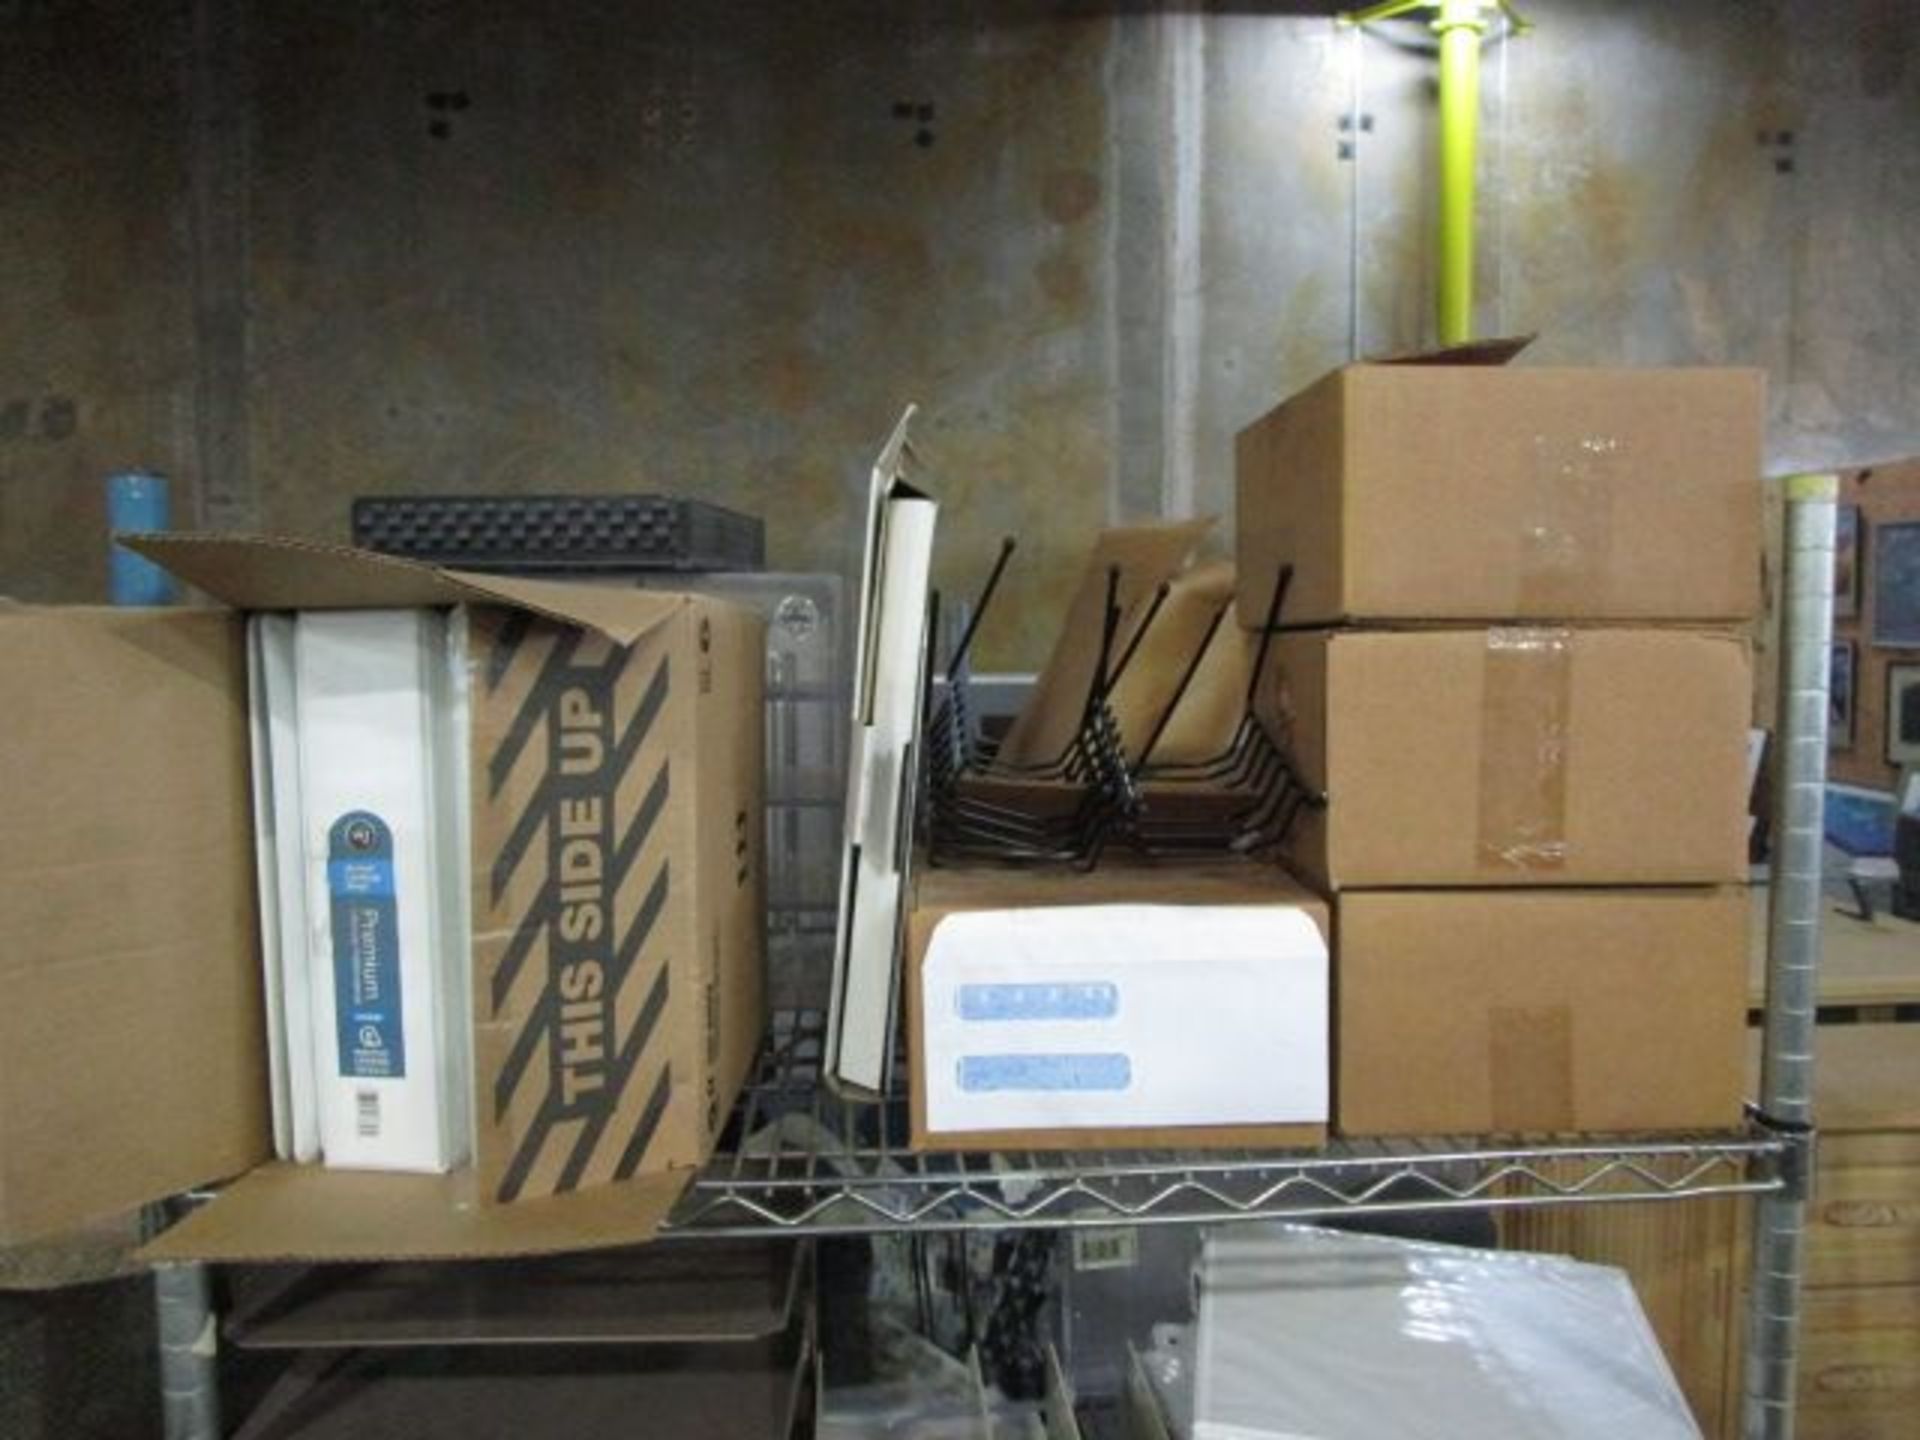 SHELVING UNIT CONSISTING OF OFFICE SUPPLIES - Image 2 of 5